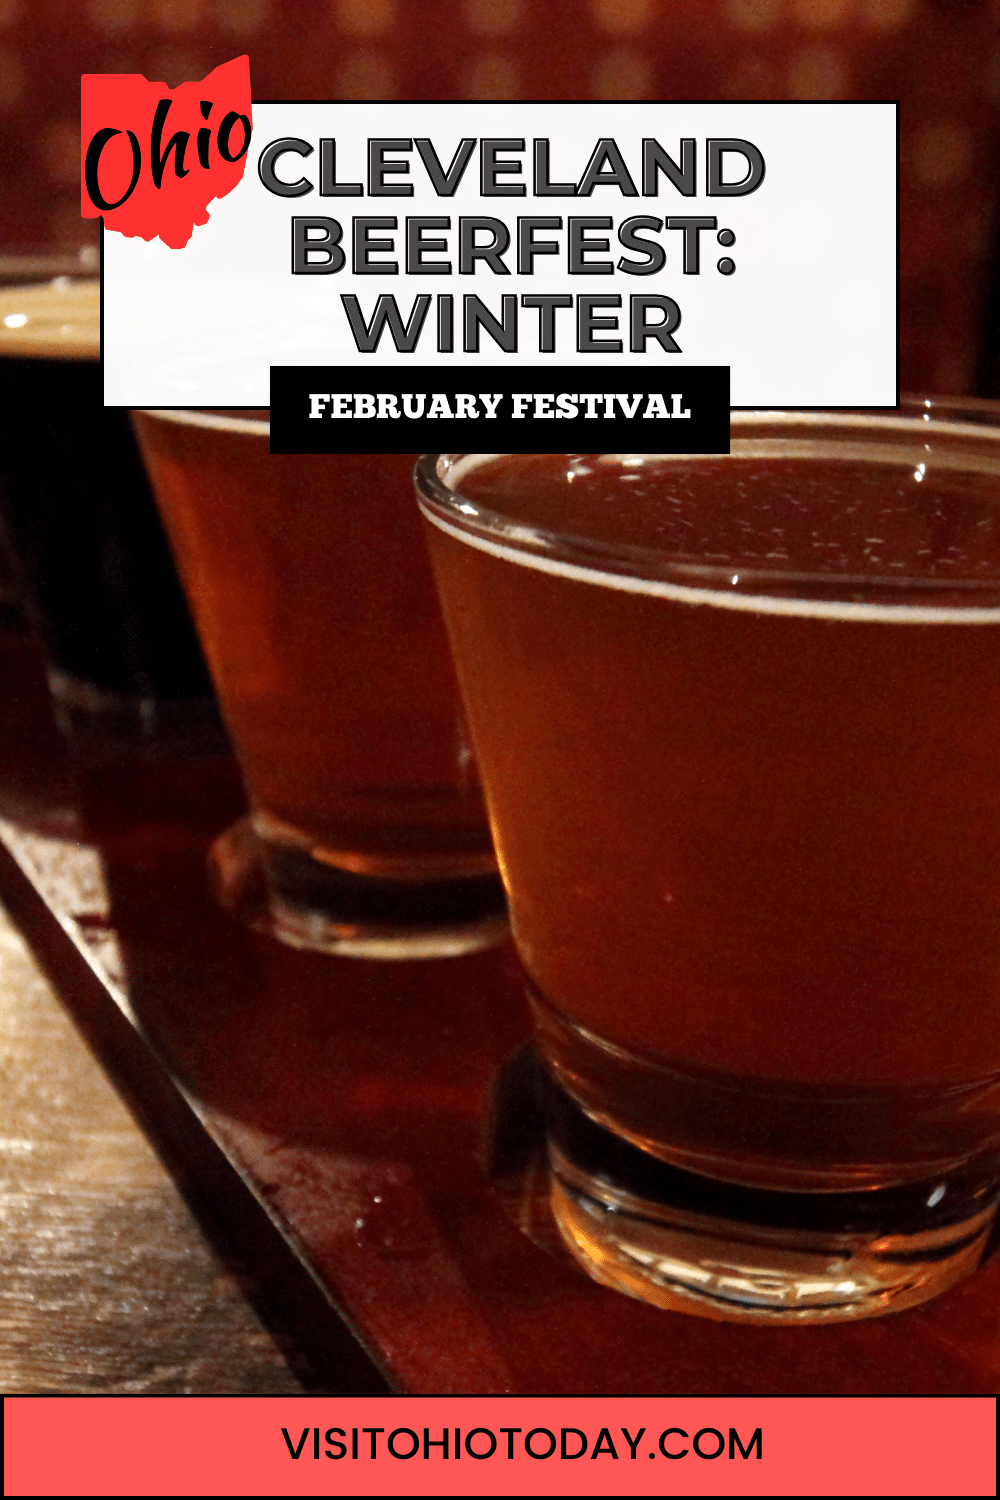 The Cleveland Beerfest: Winter, is an annual event held in February. The event showcases more than 150 craft beers.